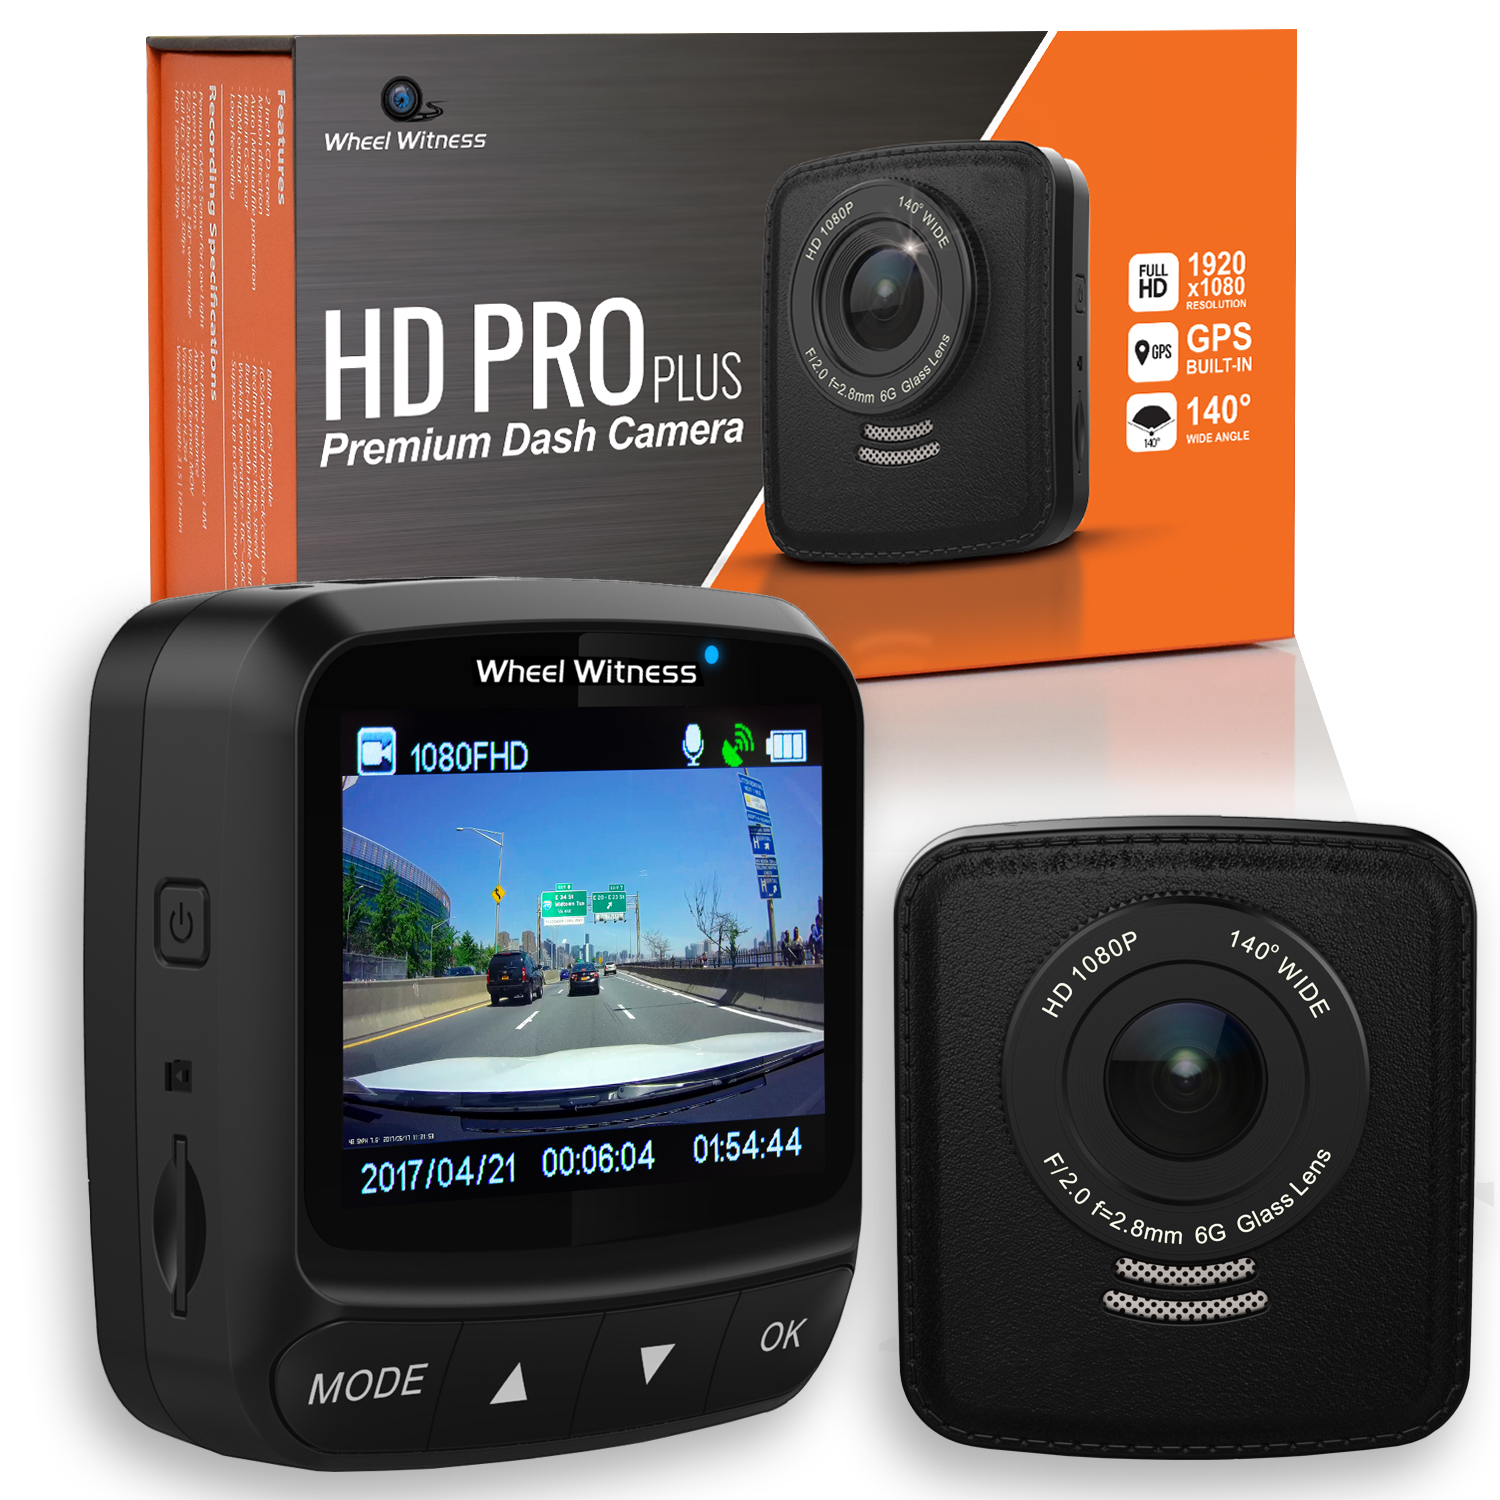 Dashboard Camera Review: The Wheel Witness HD PRO Premium